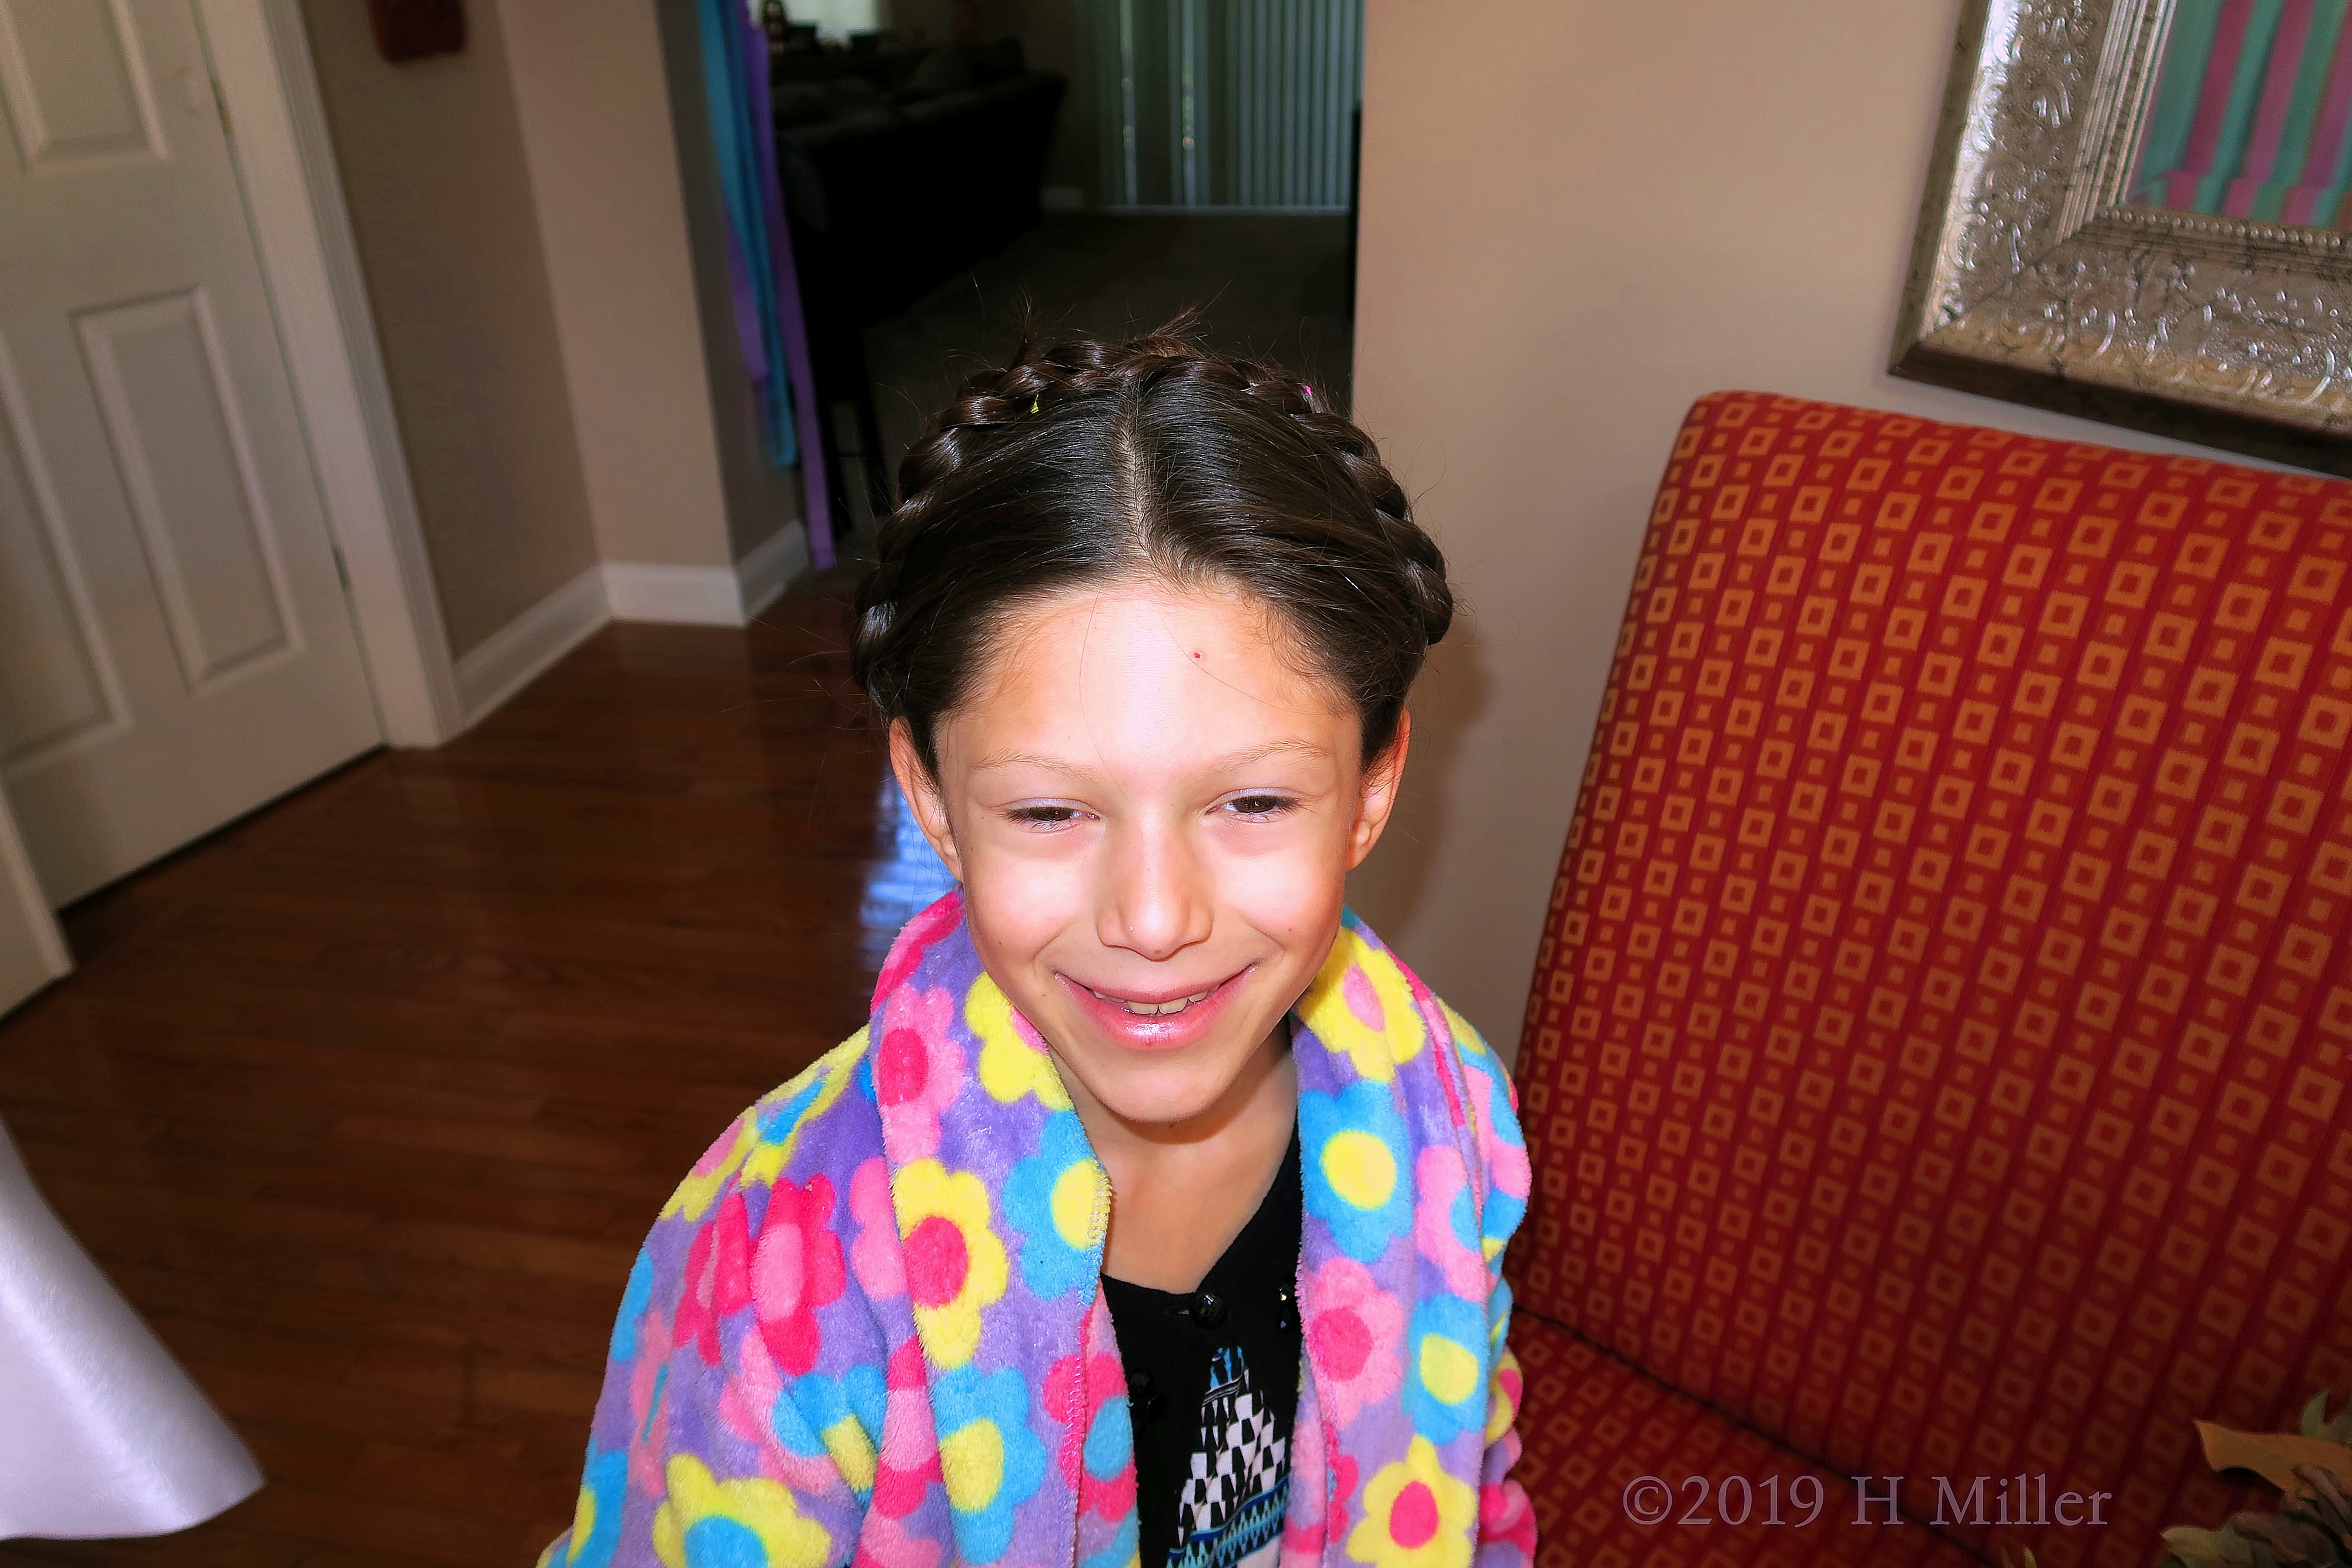 Captured In Her Crown! Kids Party Guest Gets Braided Hair Crown For Kids Hairstyle! 4